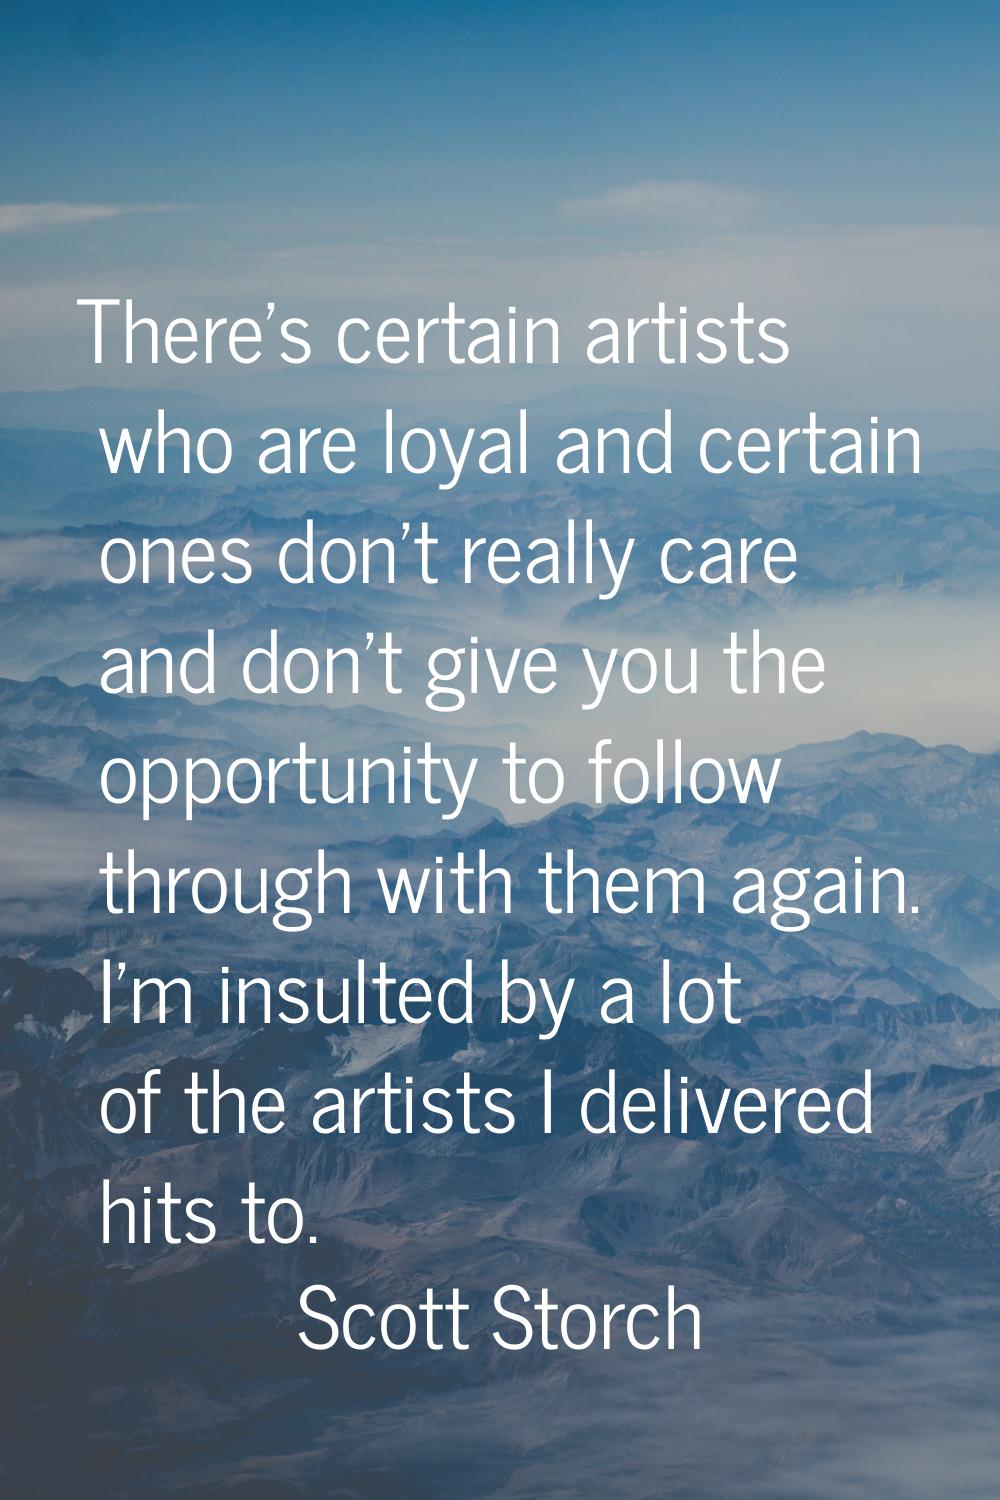 There's certain artists who are loyal and certain ones don't really care and don't give you the opp